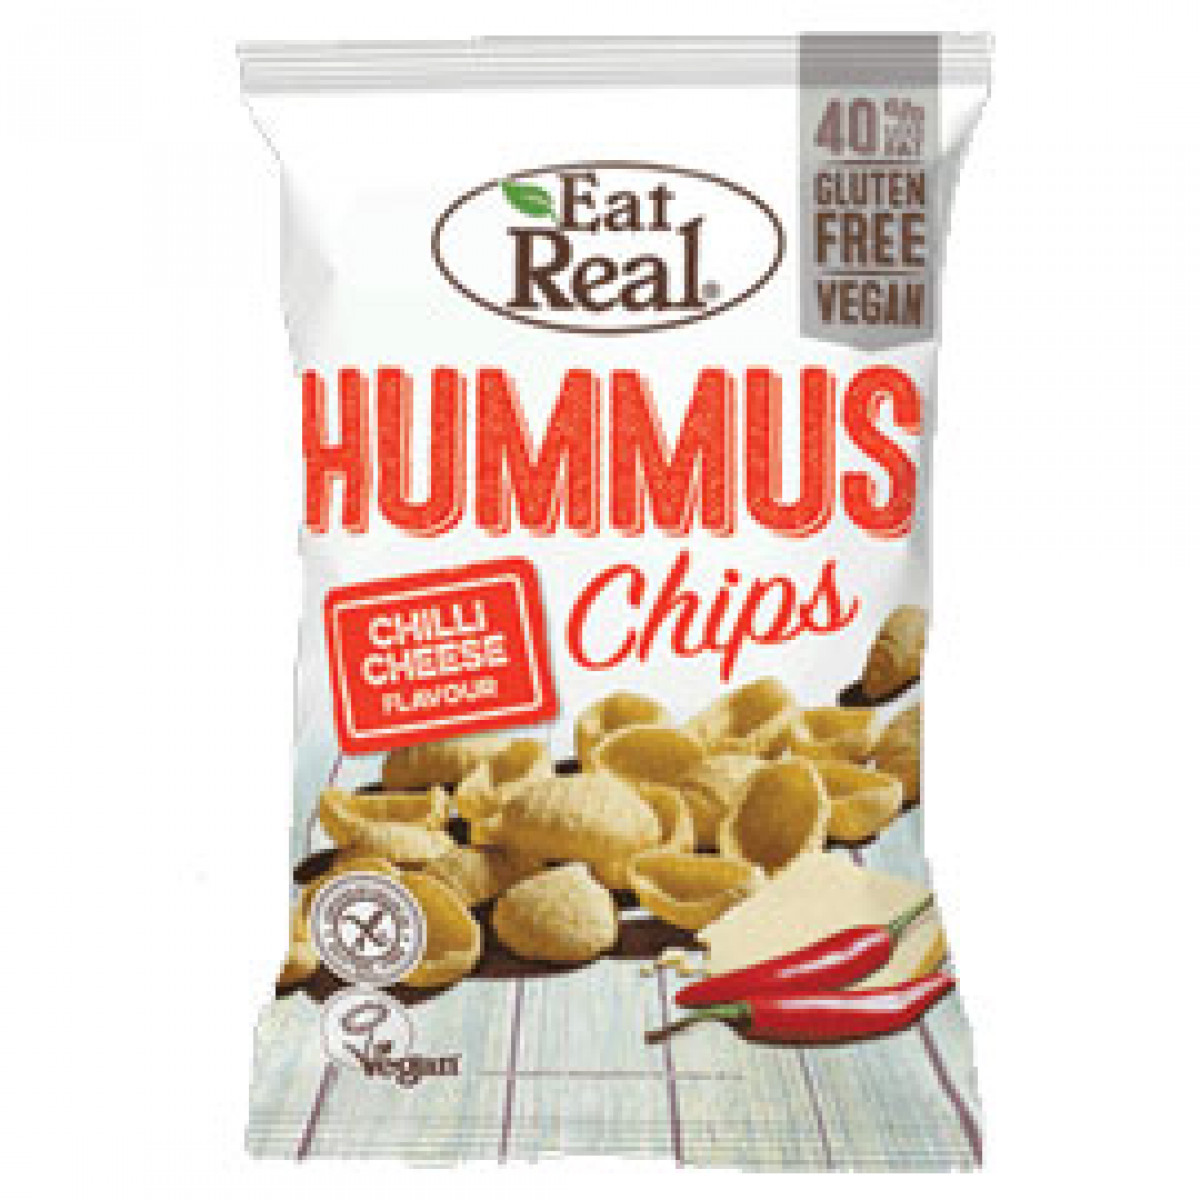 Product picture for Hummus Chips Chilli Cheese